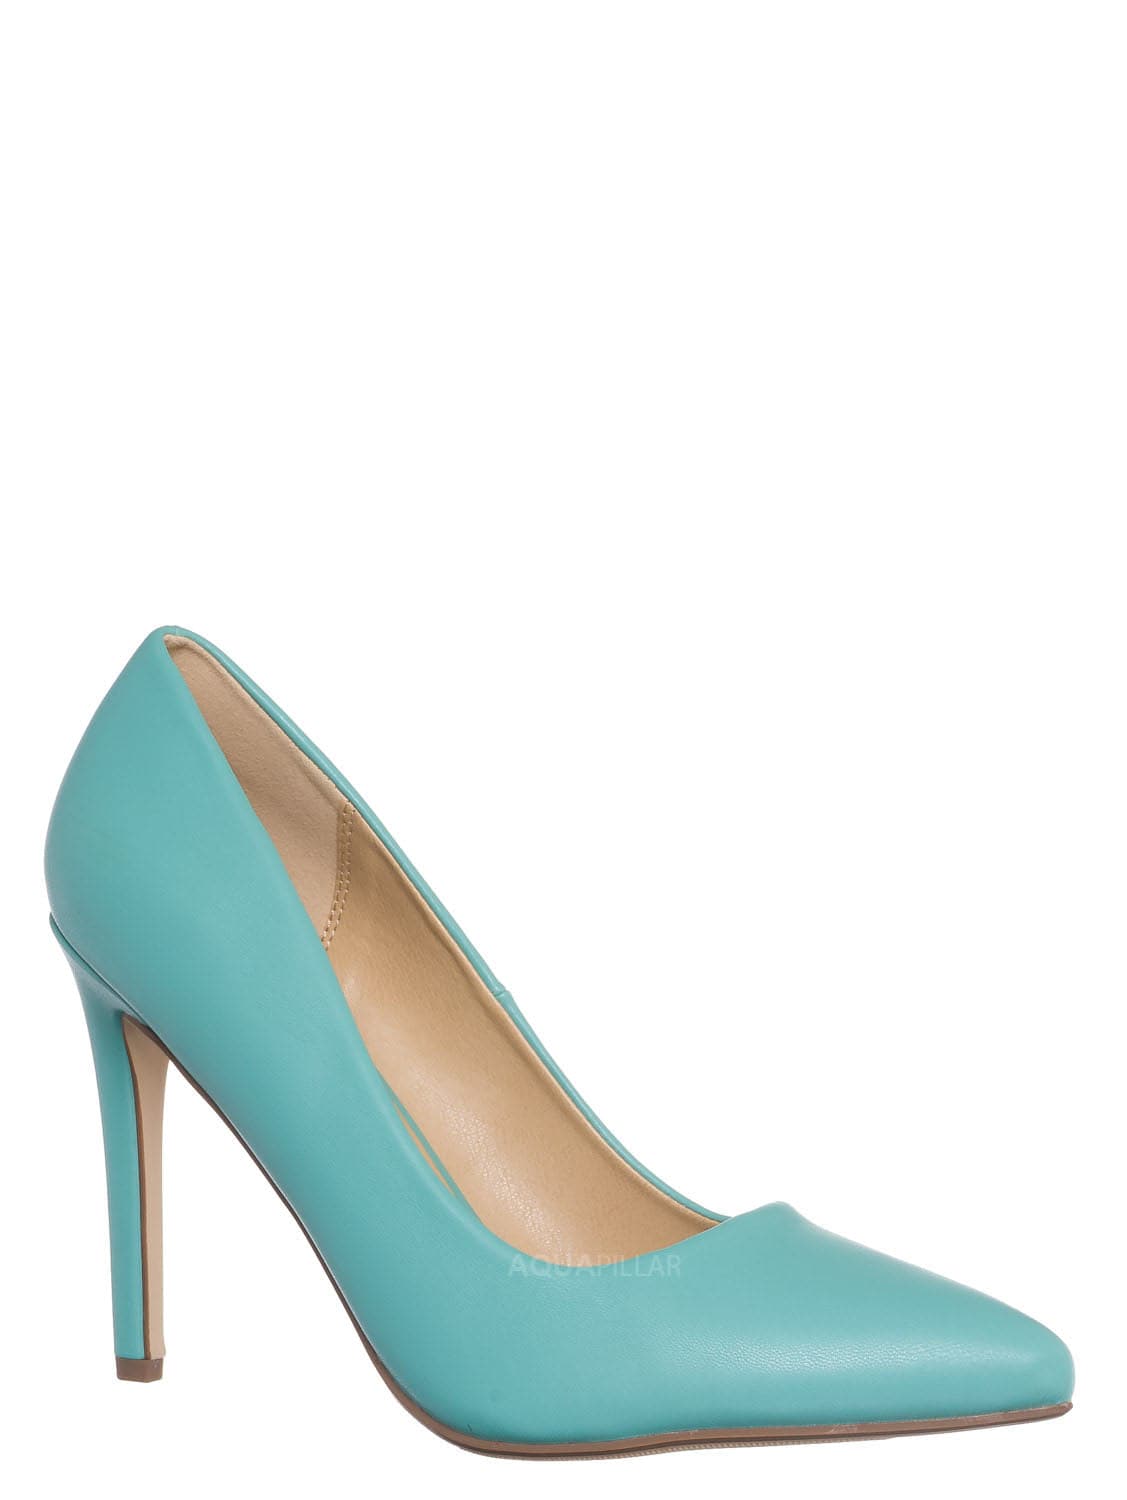 Teal Blue / Cindy Classic Pointed Toe Dress Pump - Womens High Heel Stiletto Formal Shoes